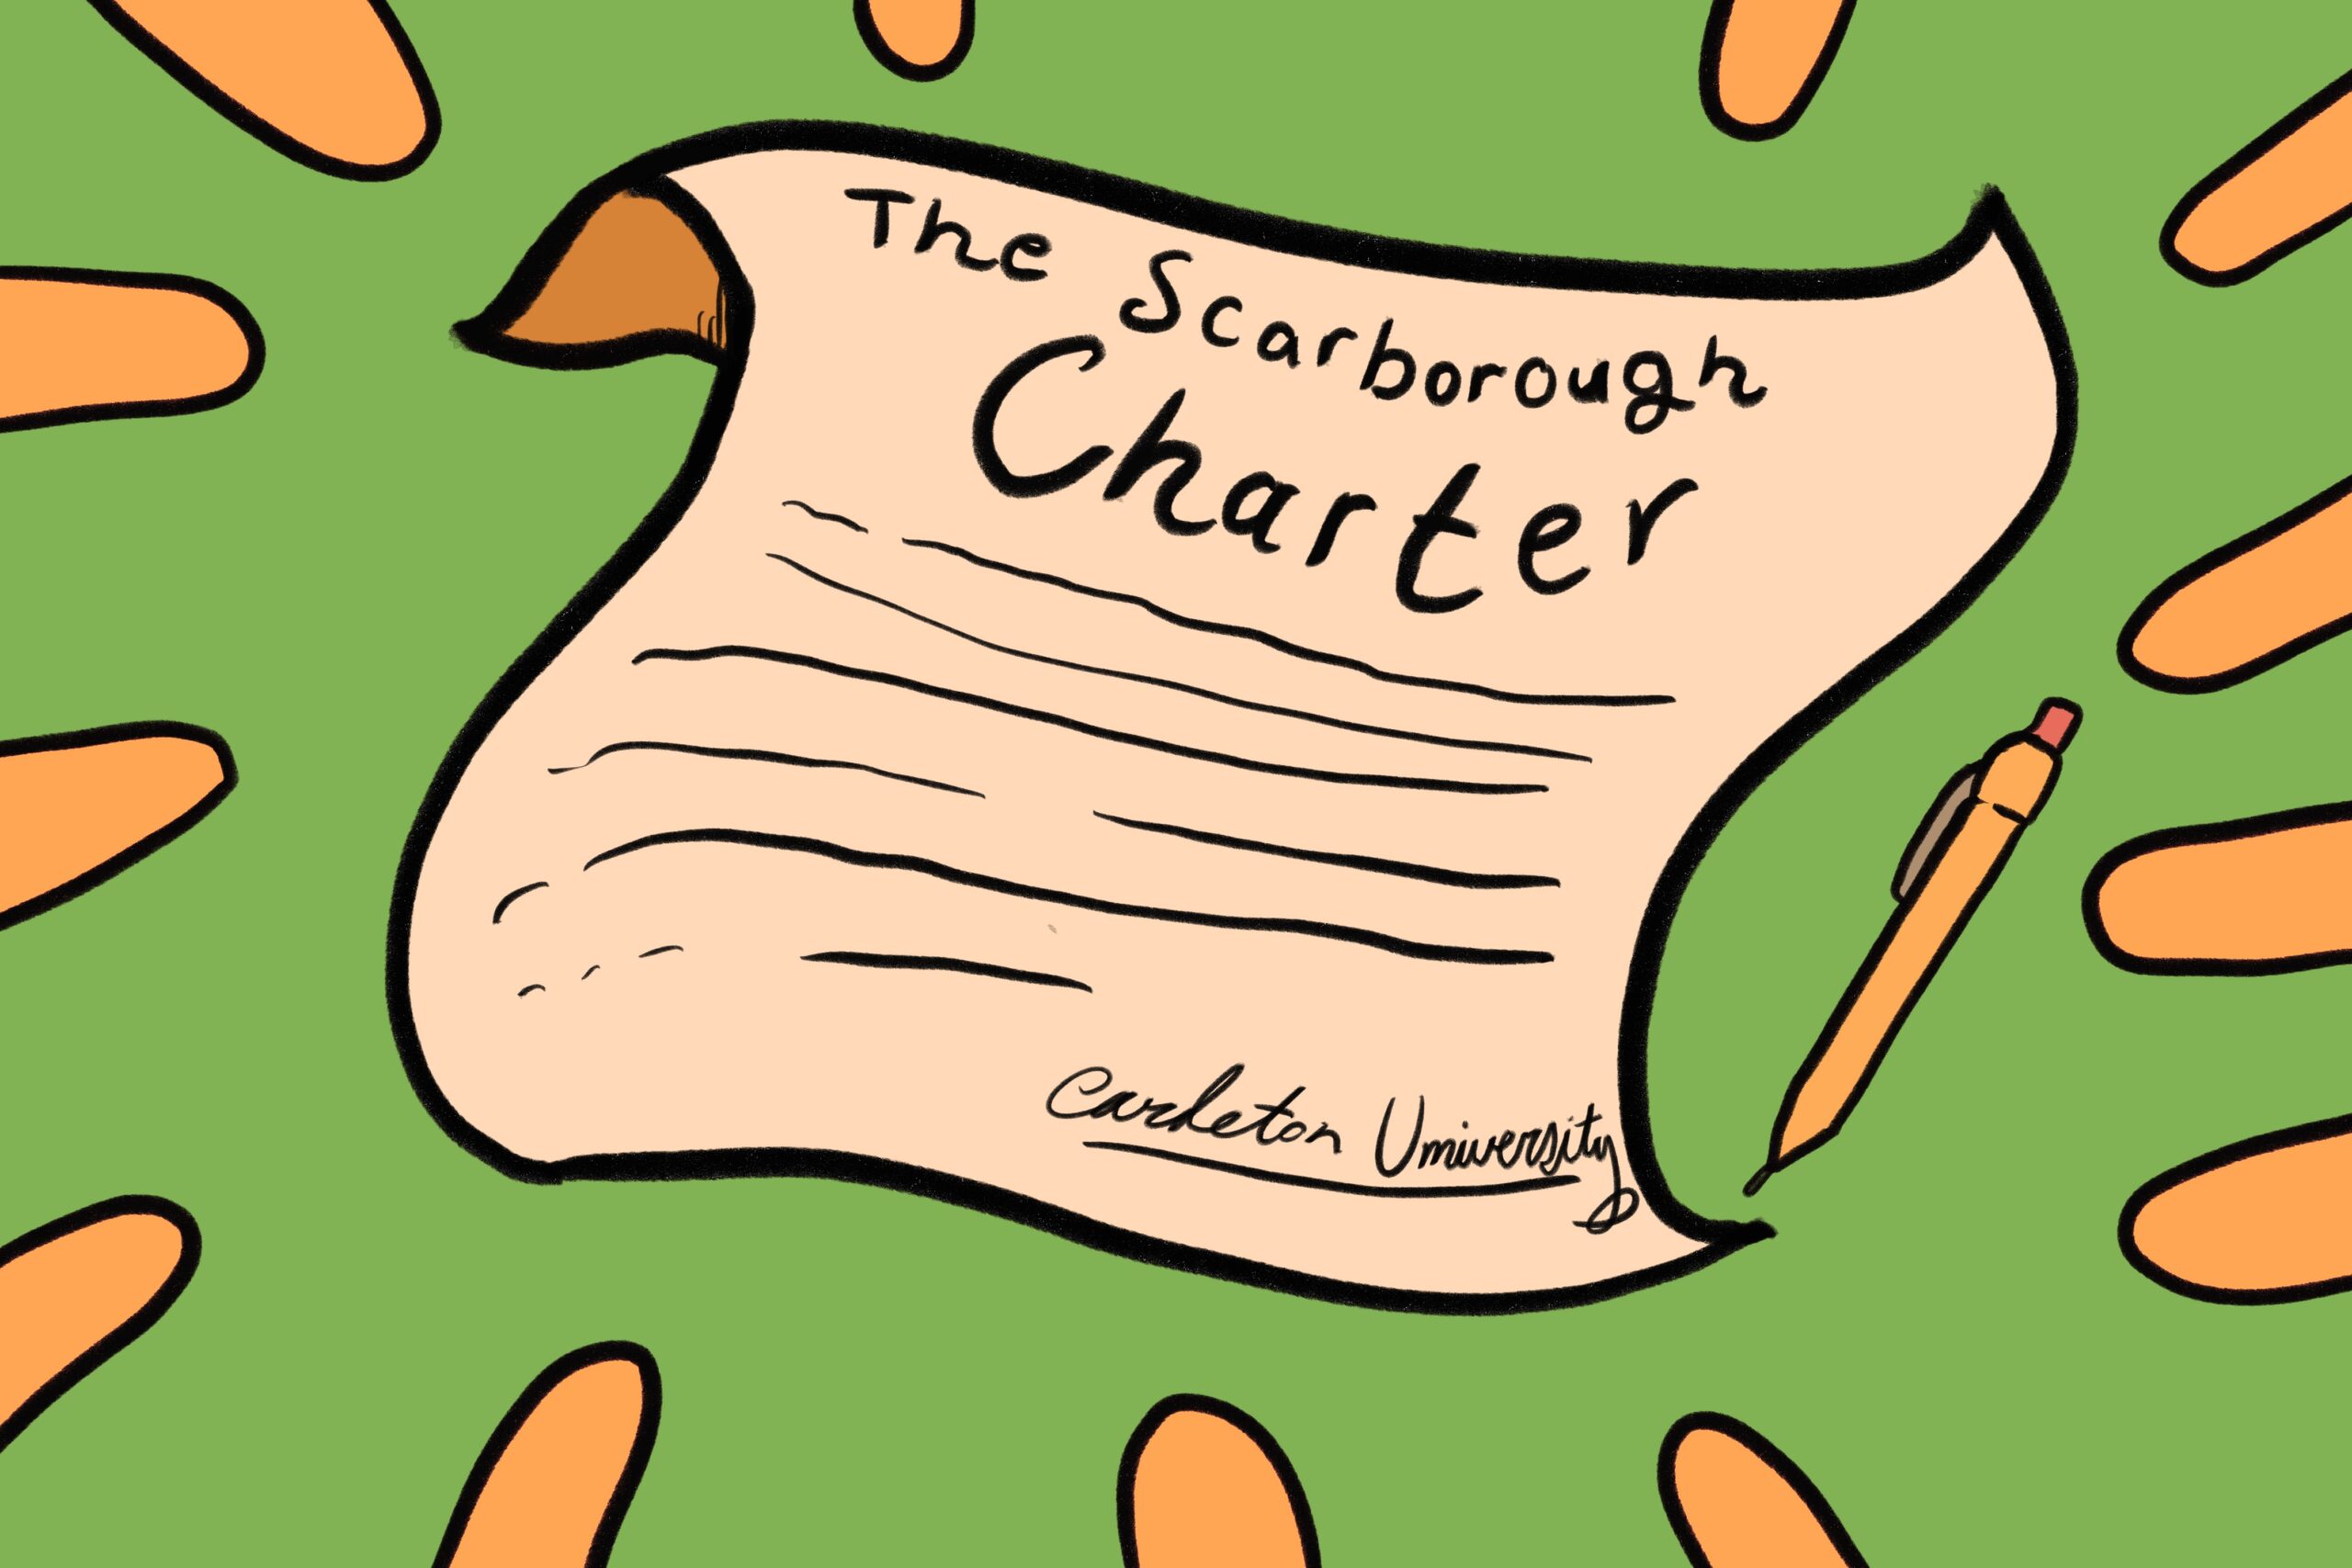 The Scarborough Charter.